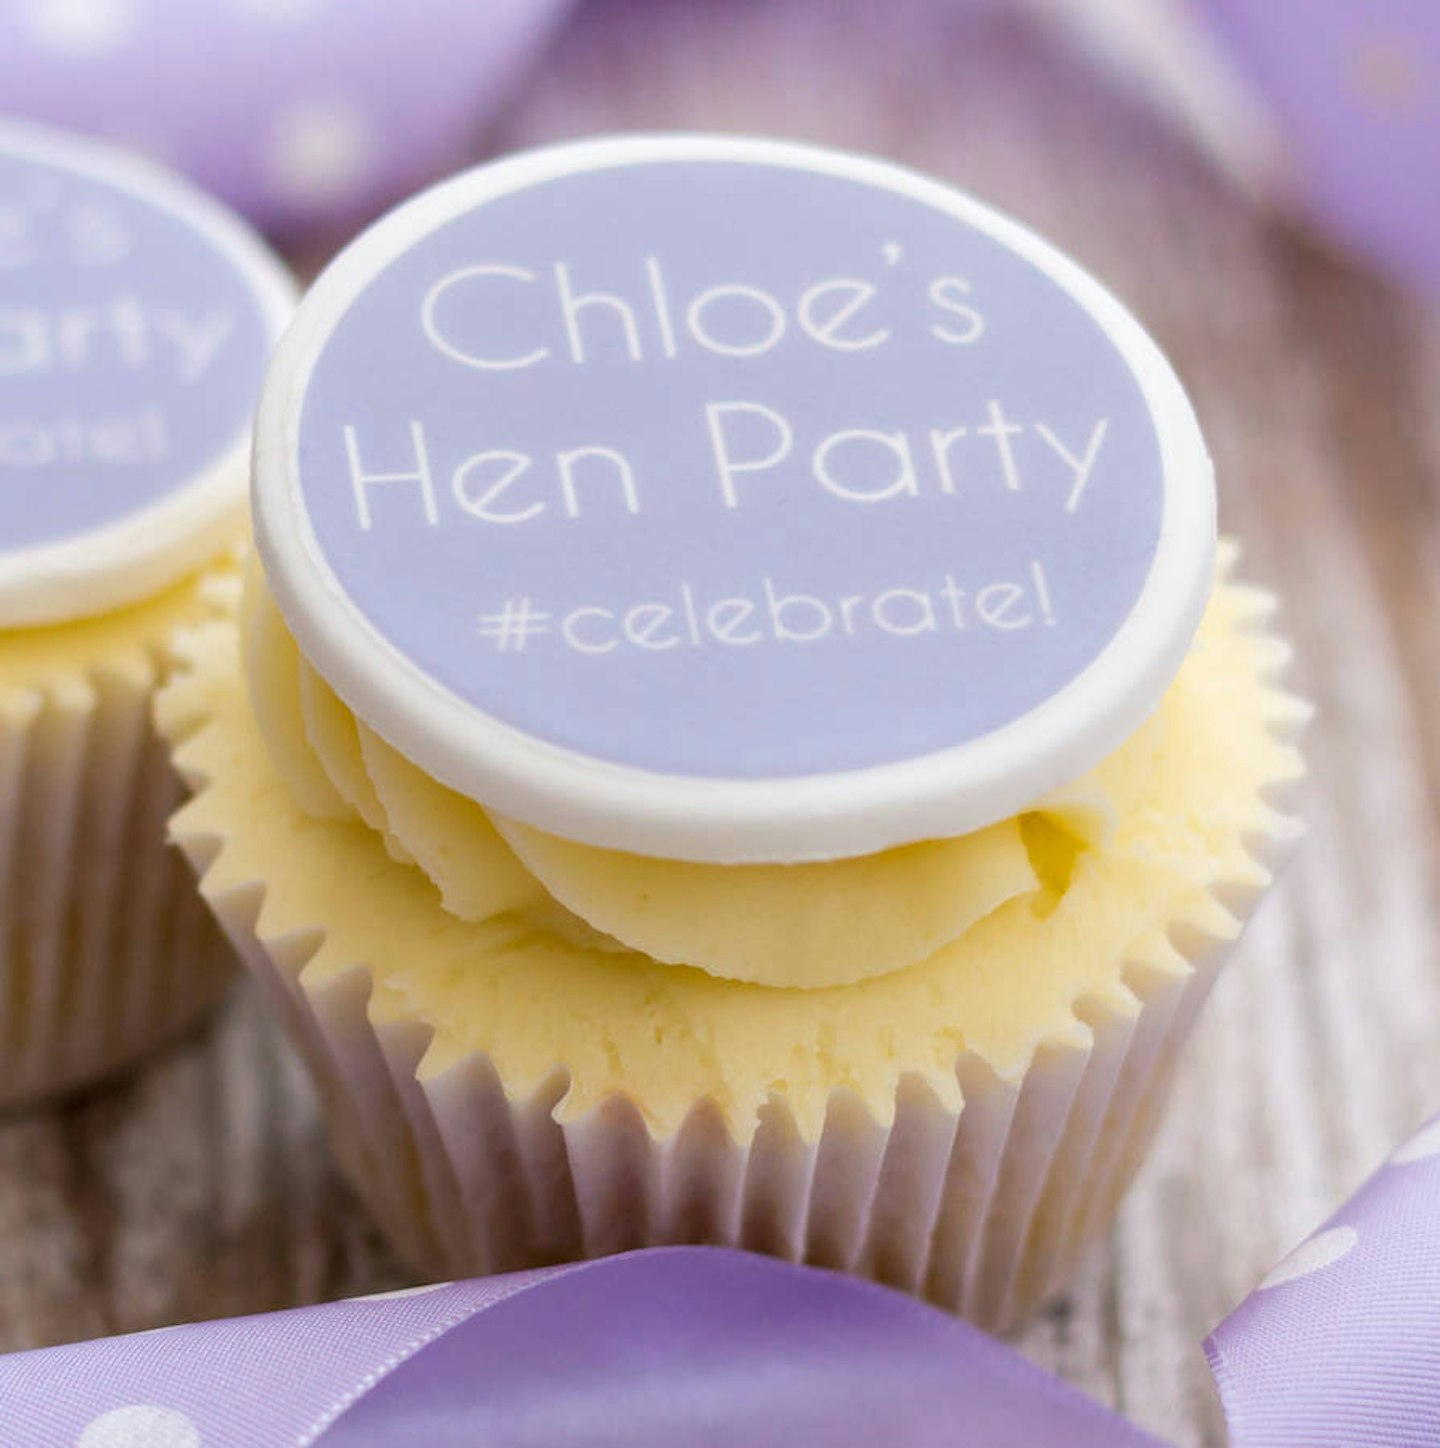 Just Bake Hen Party #Celebrate Cupcake Decorations